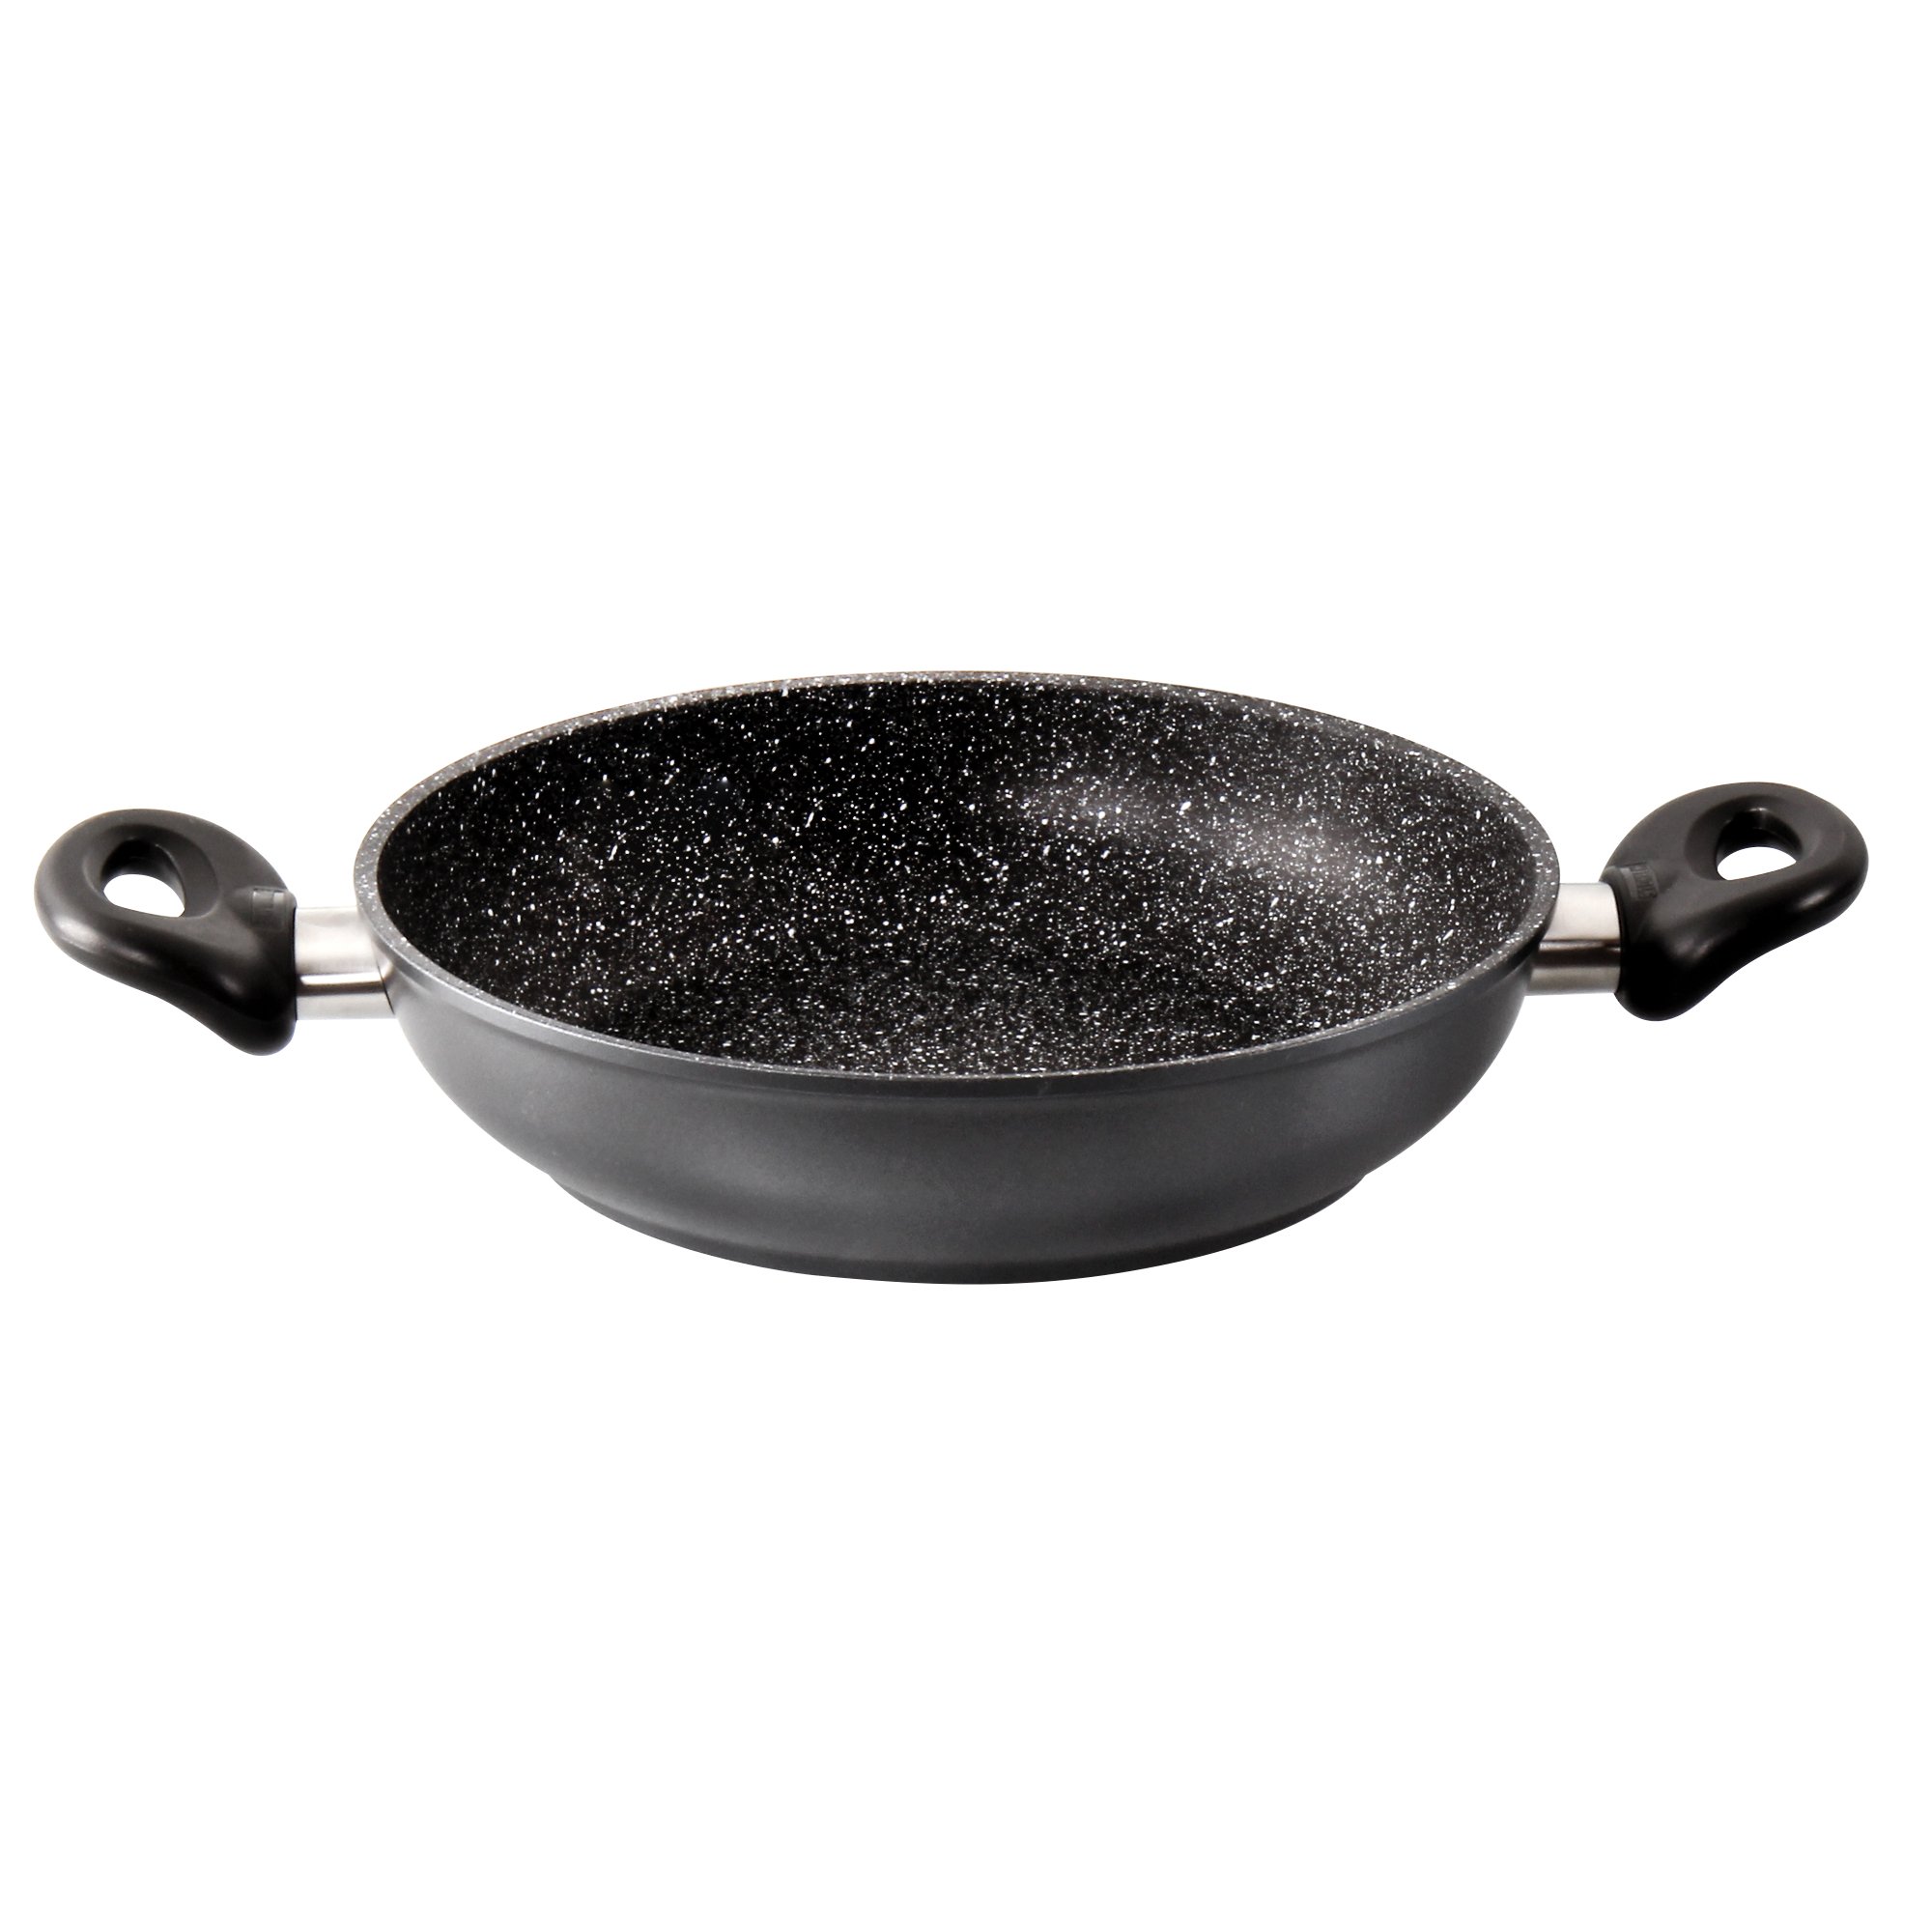 STONELINE® Serving Pan 24 cm, Made in Germany